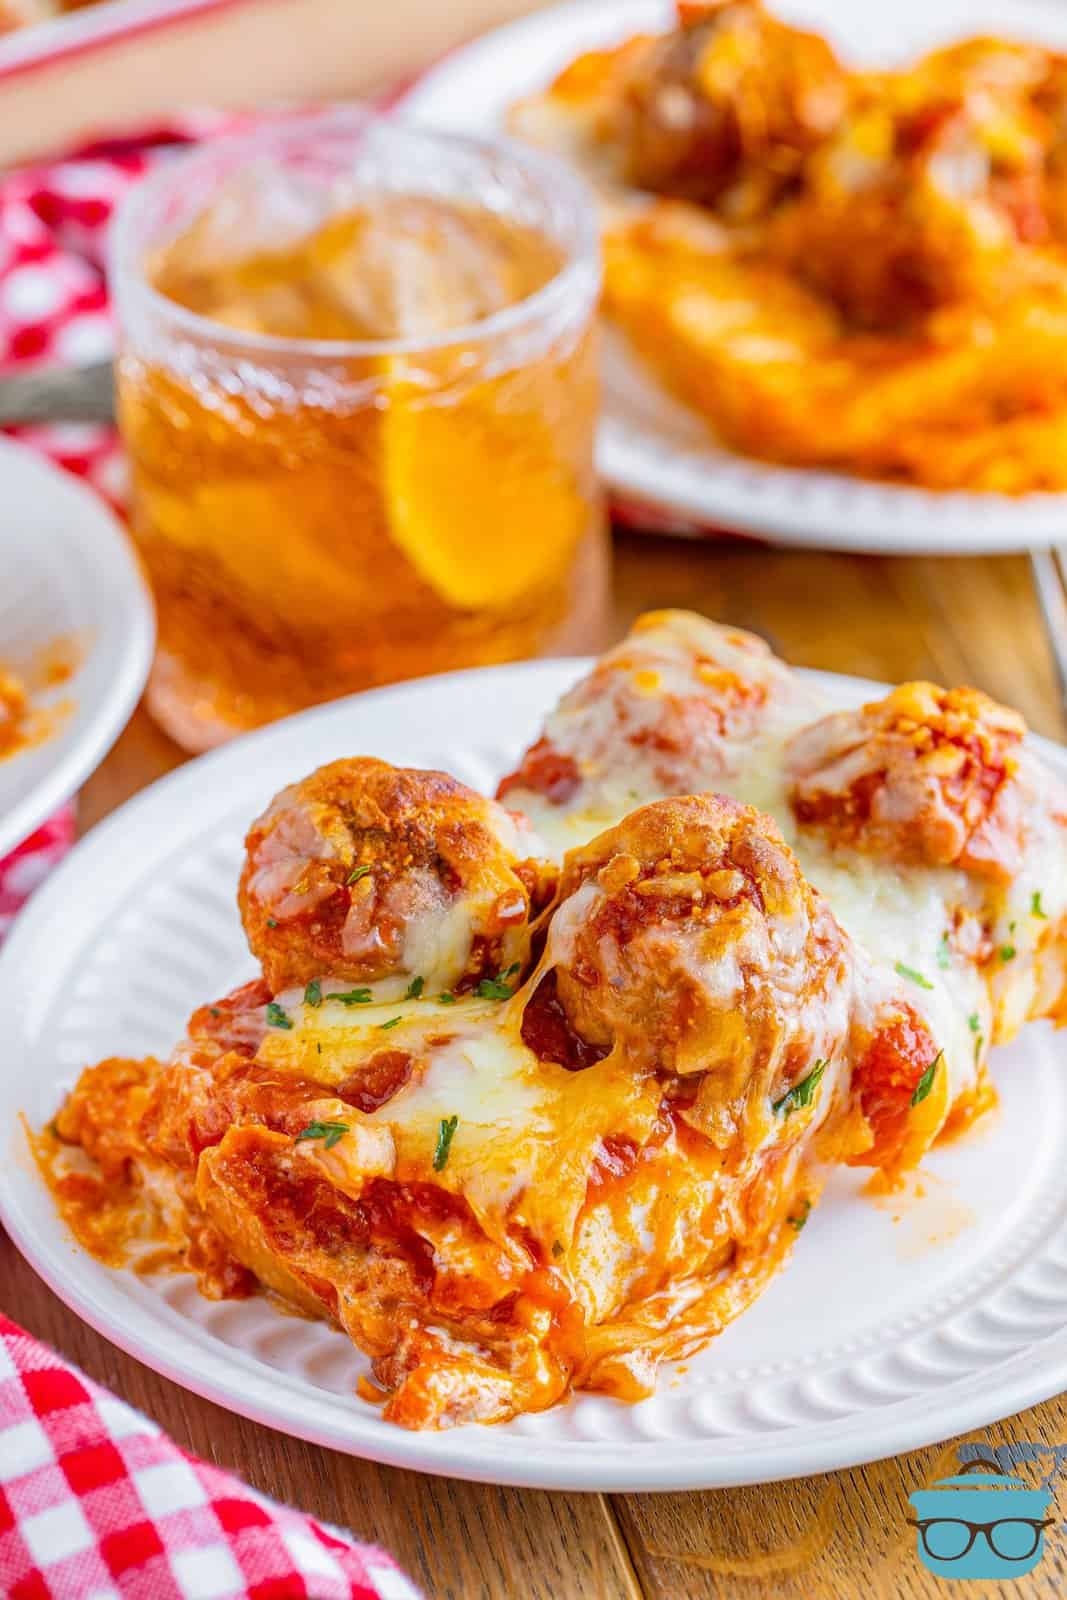 a slice of meatball sub casserole shown on a white plate with a glass of iced tea in the background.